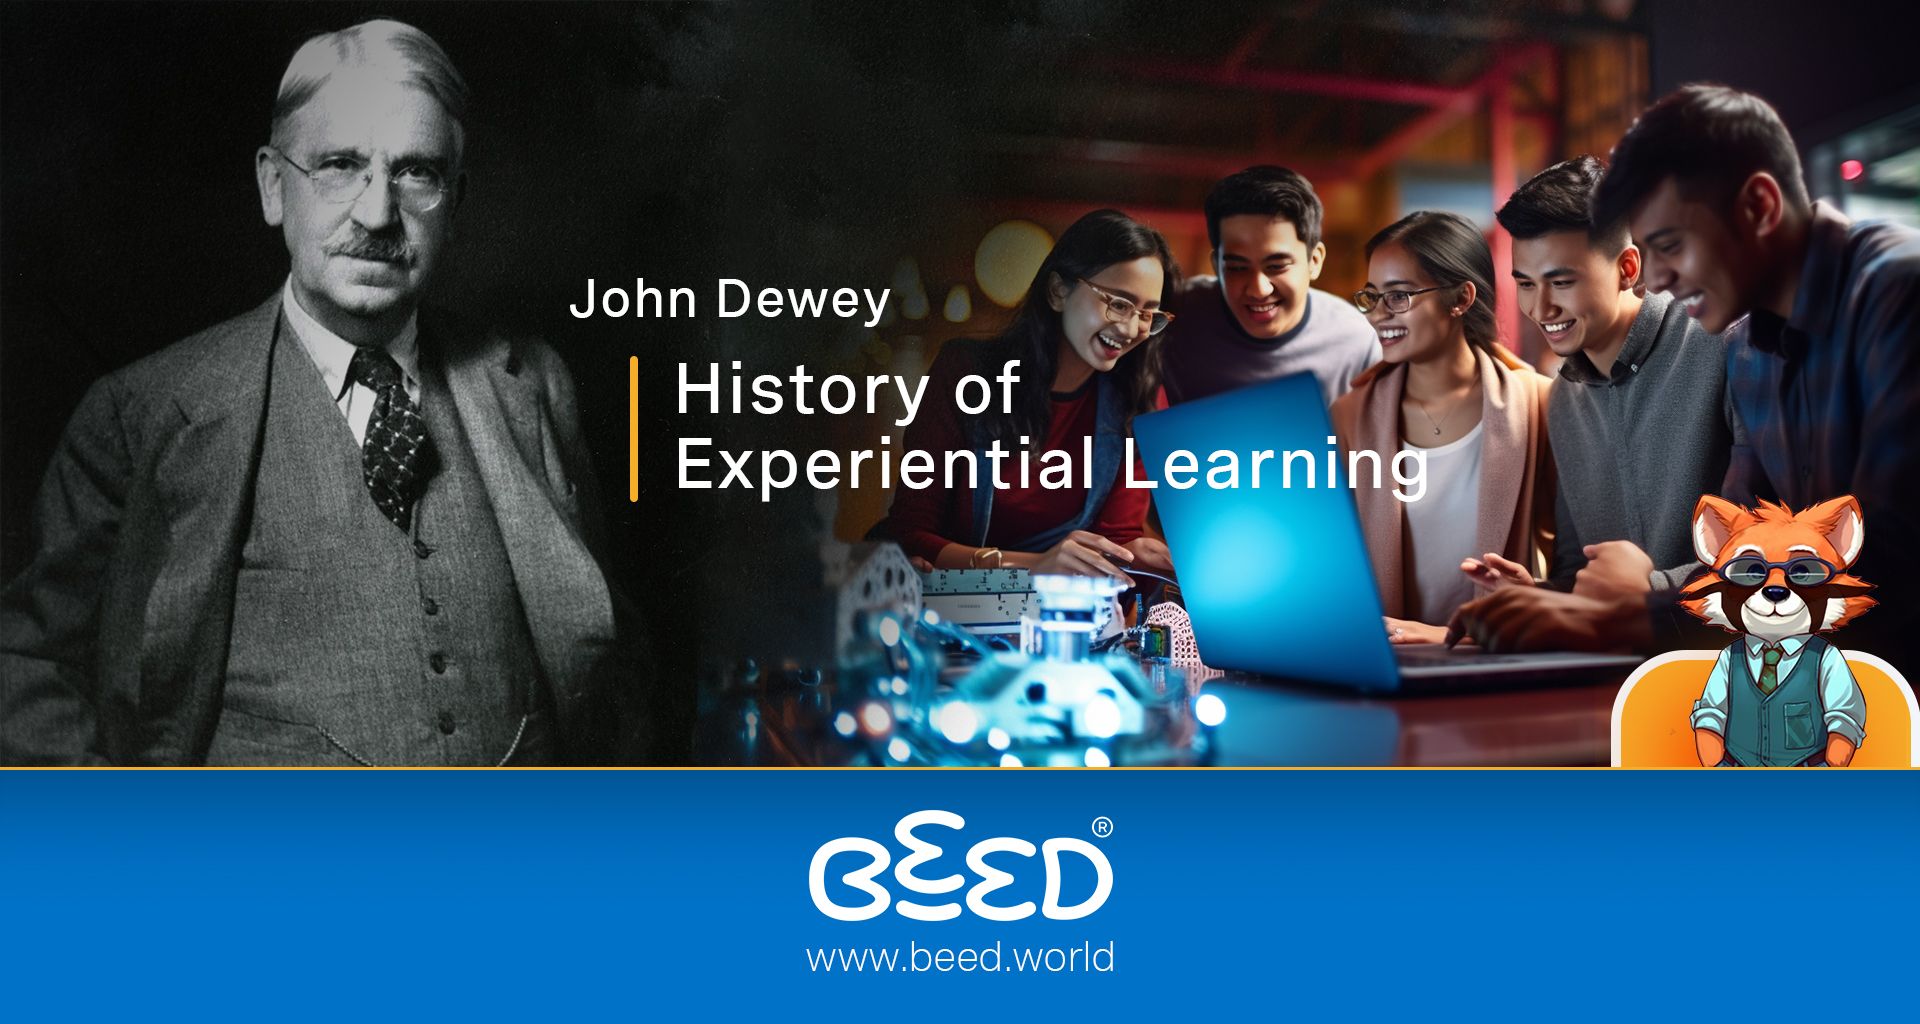 John Dewey - History of Experiential Learning